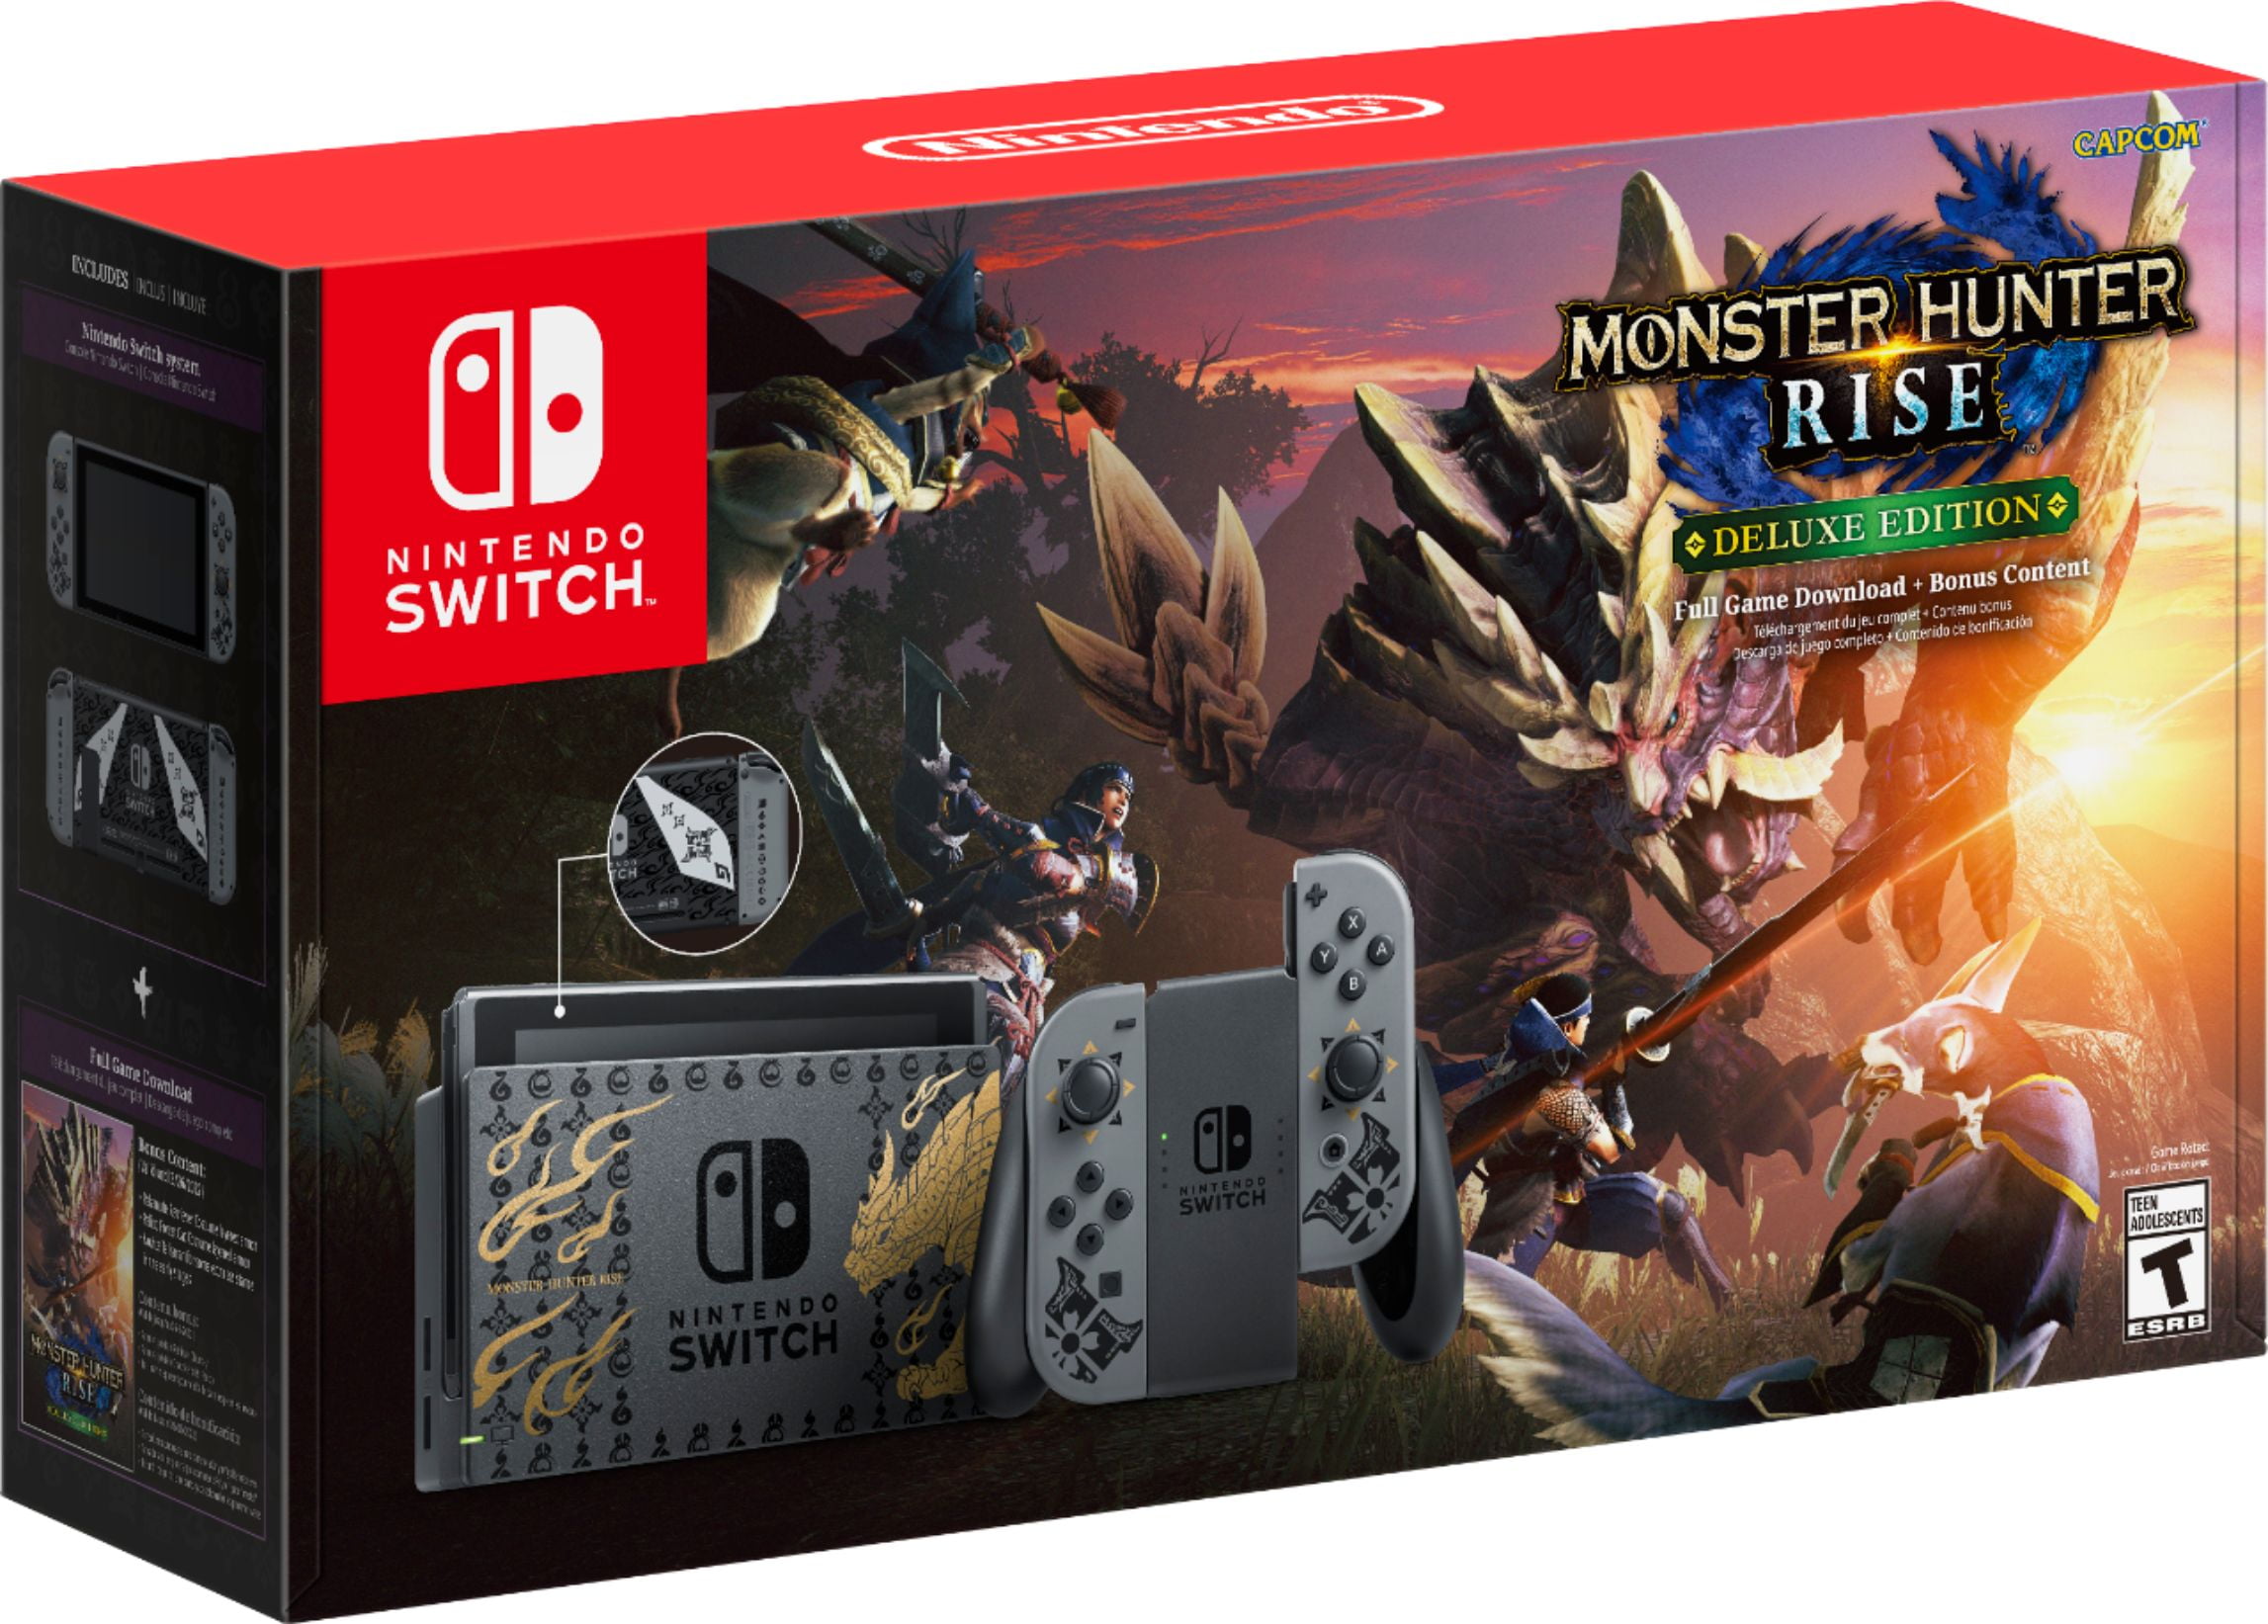 Gray RISE Switch HUNTER Edition System - Deluxe MONSTER Nintendo